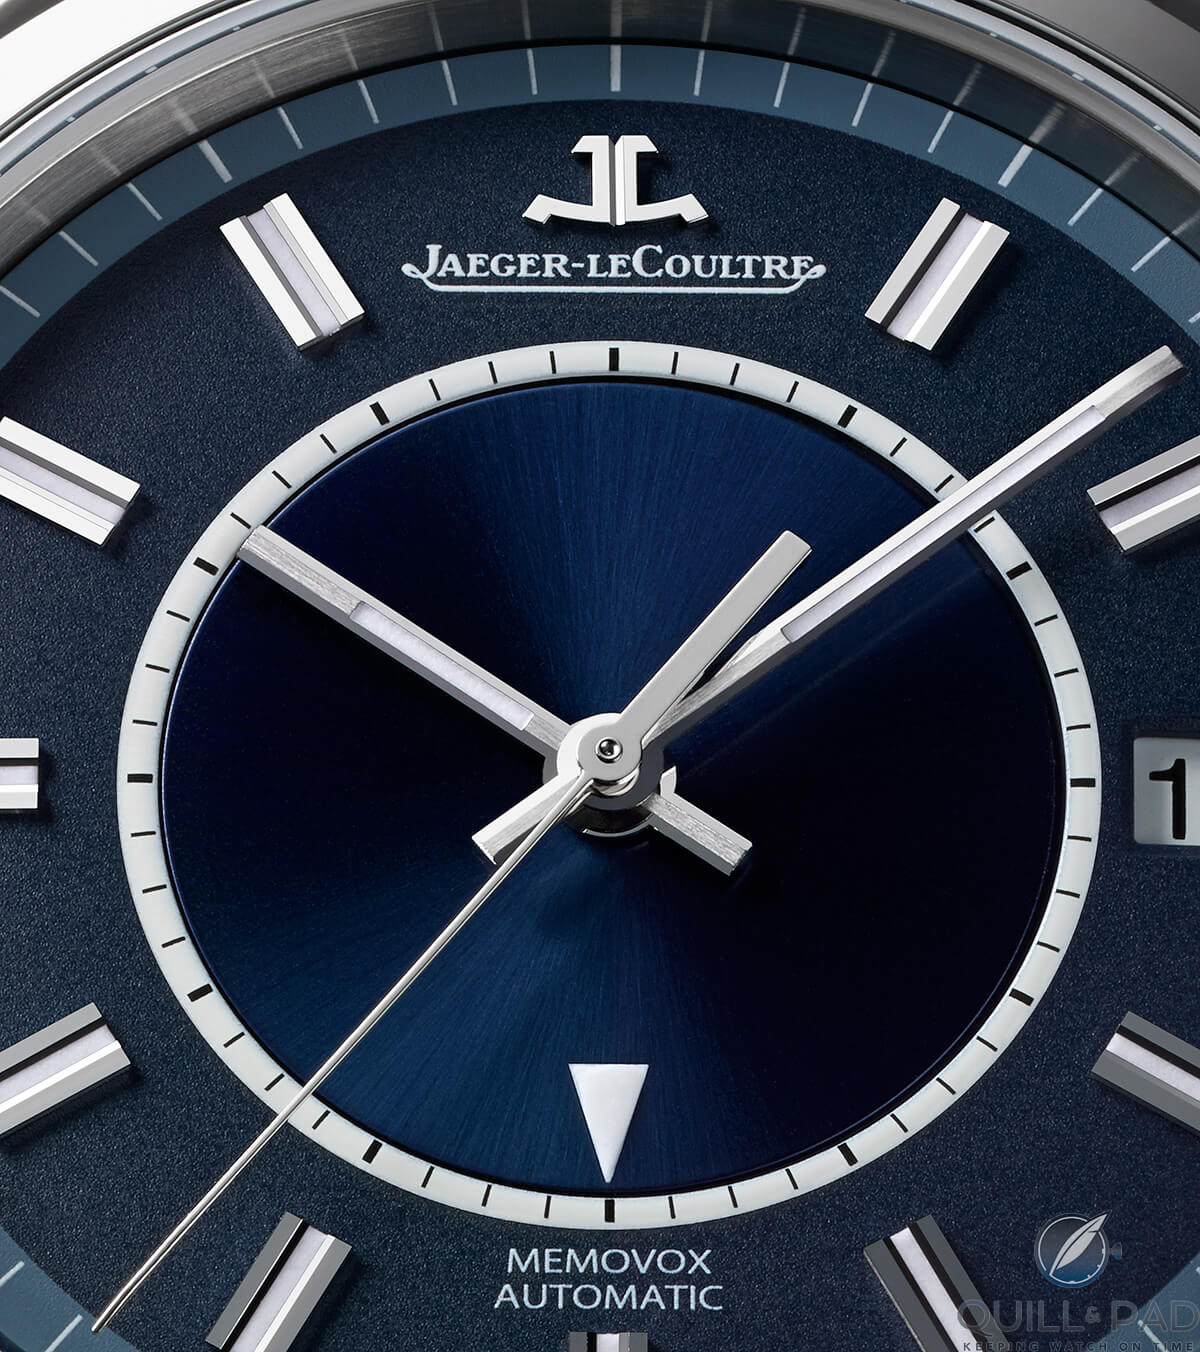 Close up look at the dial of the Jaeger-LeCoultre Memovox Boutique Edition 2016